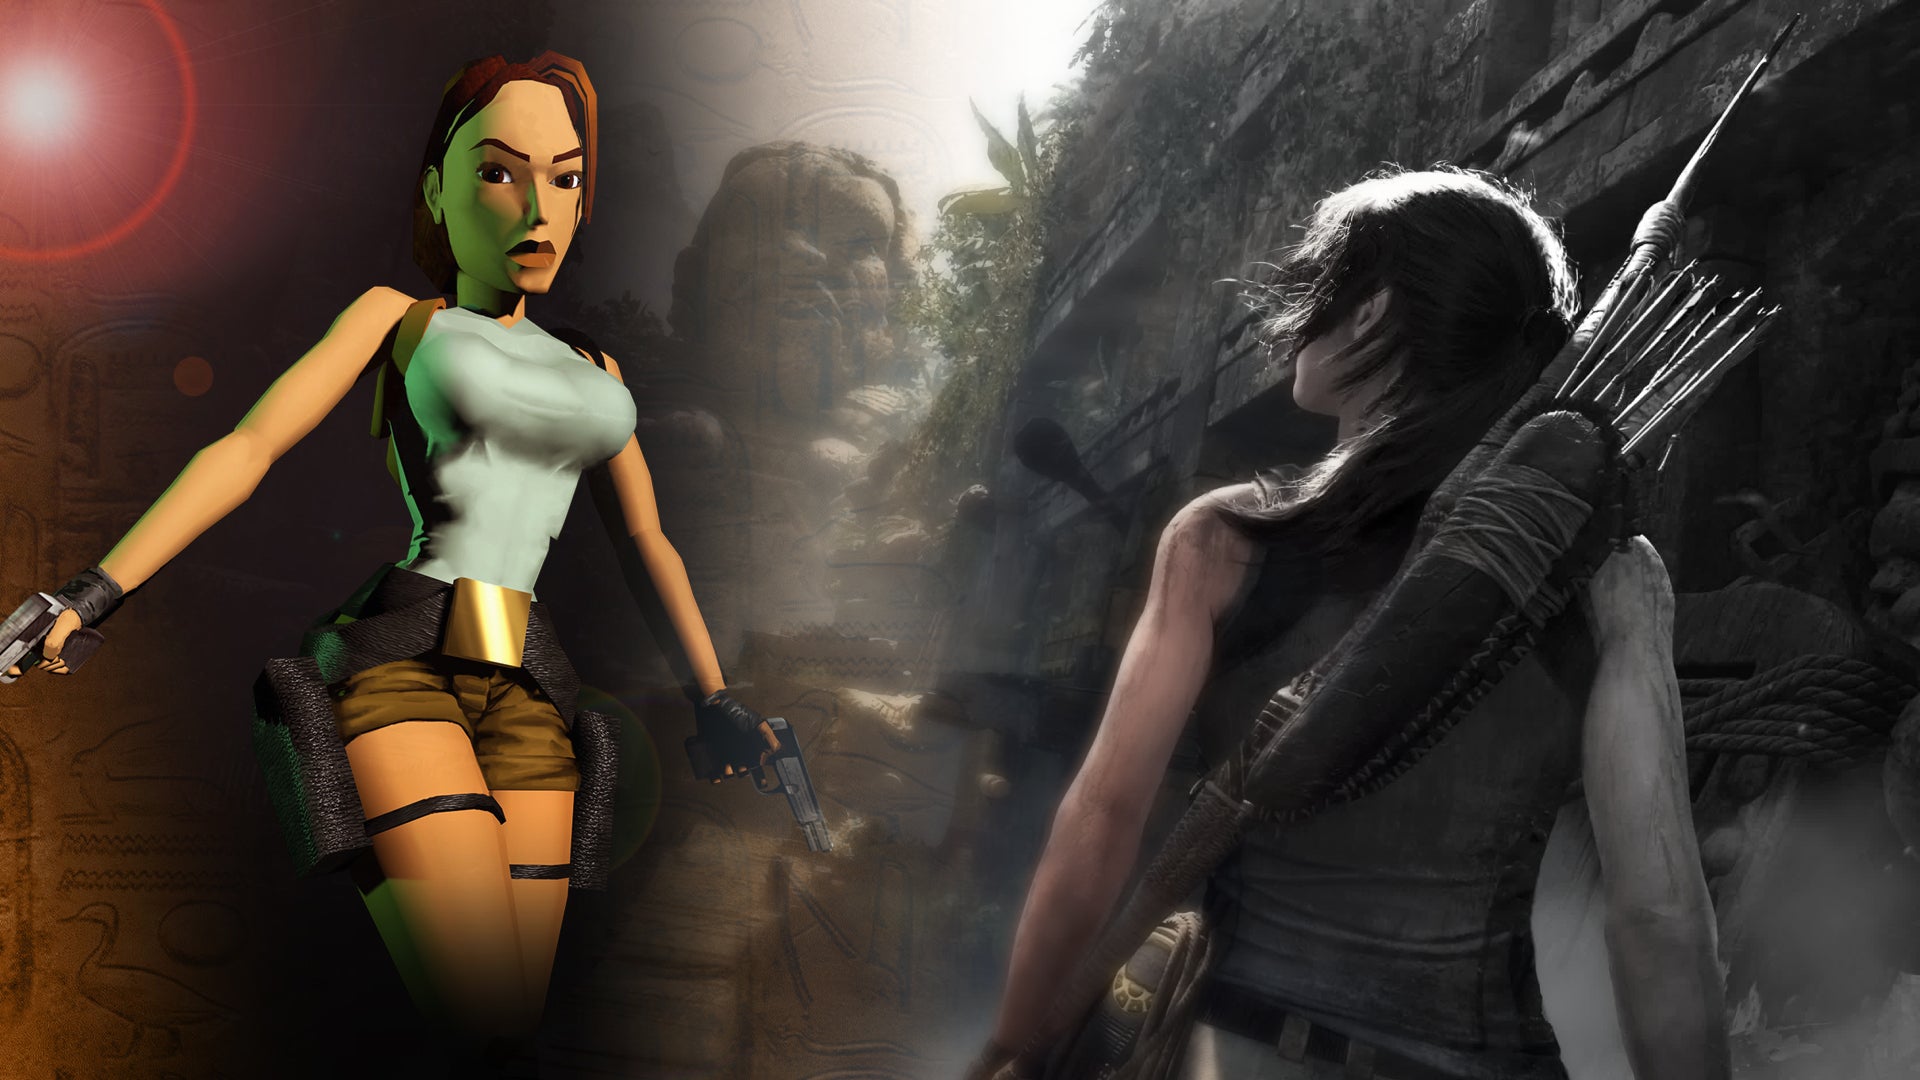 Image for Tomb Raider has 88 million lifetime sales, so why did Square Enix sell it off so cheap?